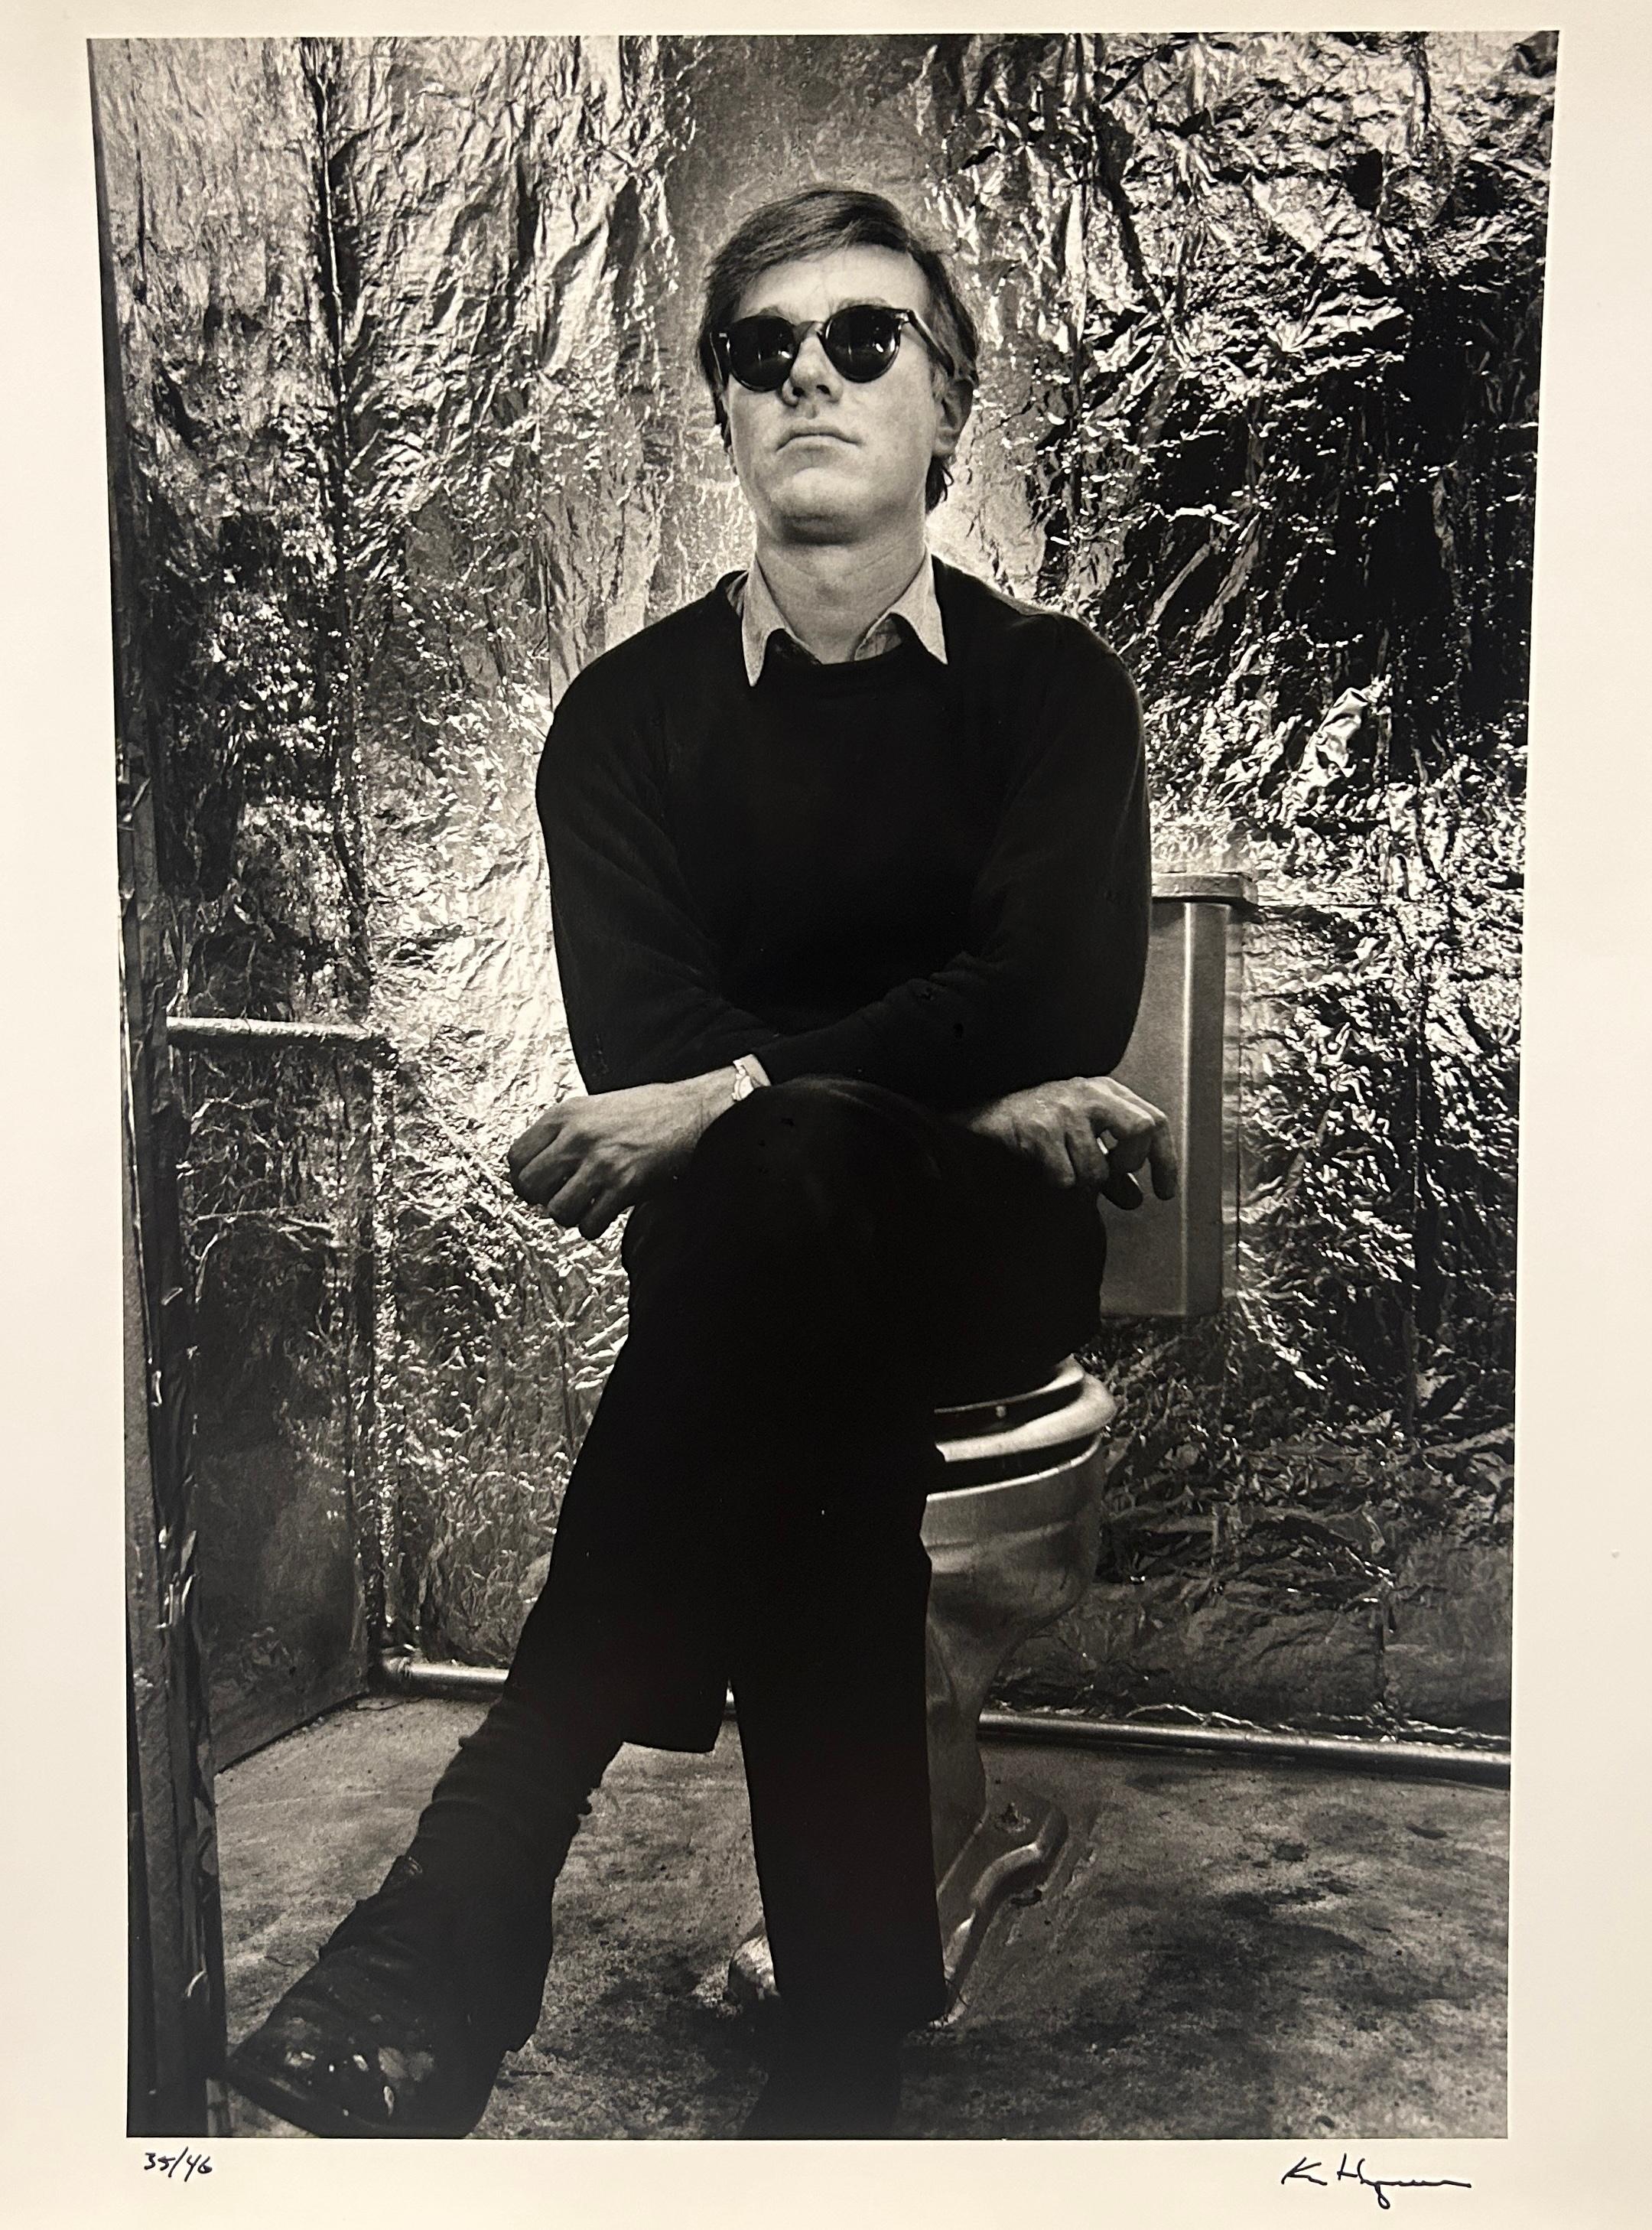 The Pop Artists: Andy Warhol on Throne - Photograph by Ken Heyman